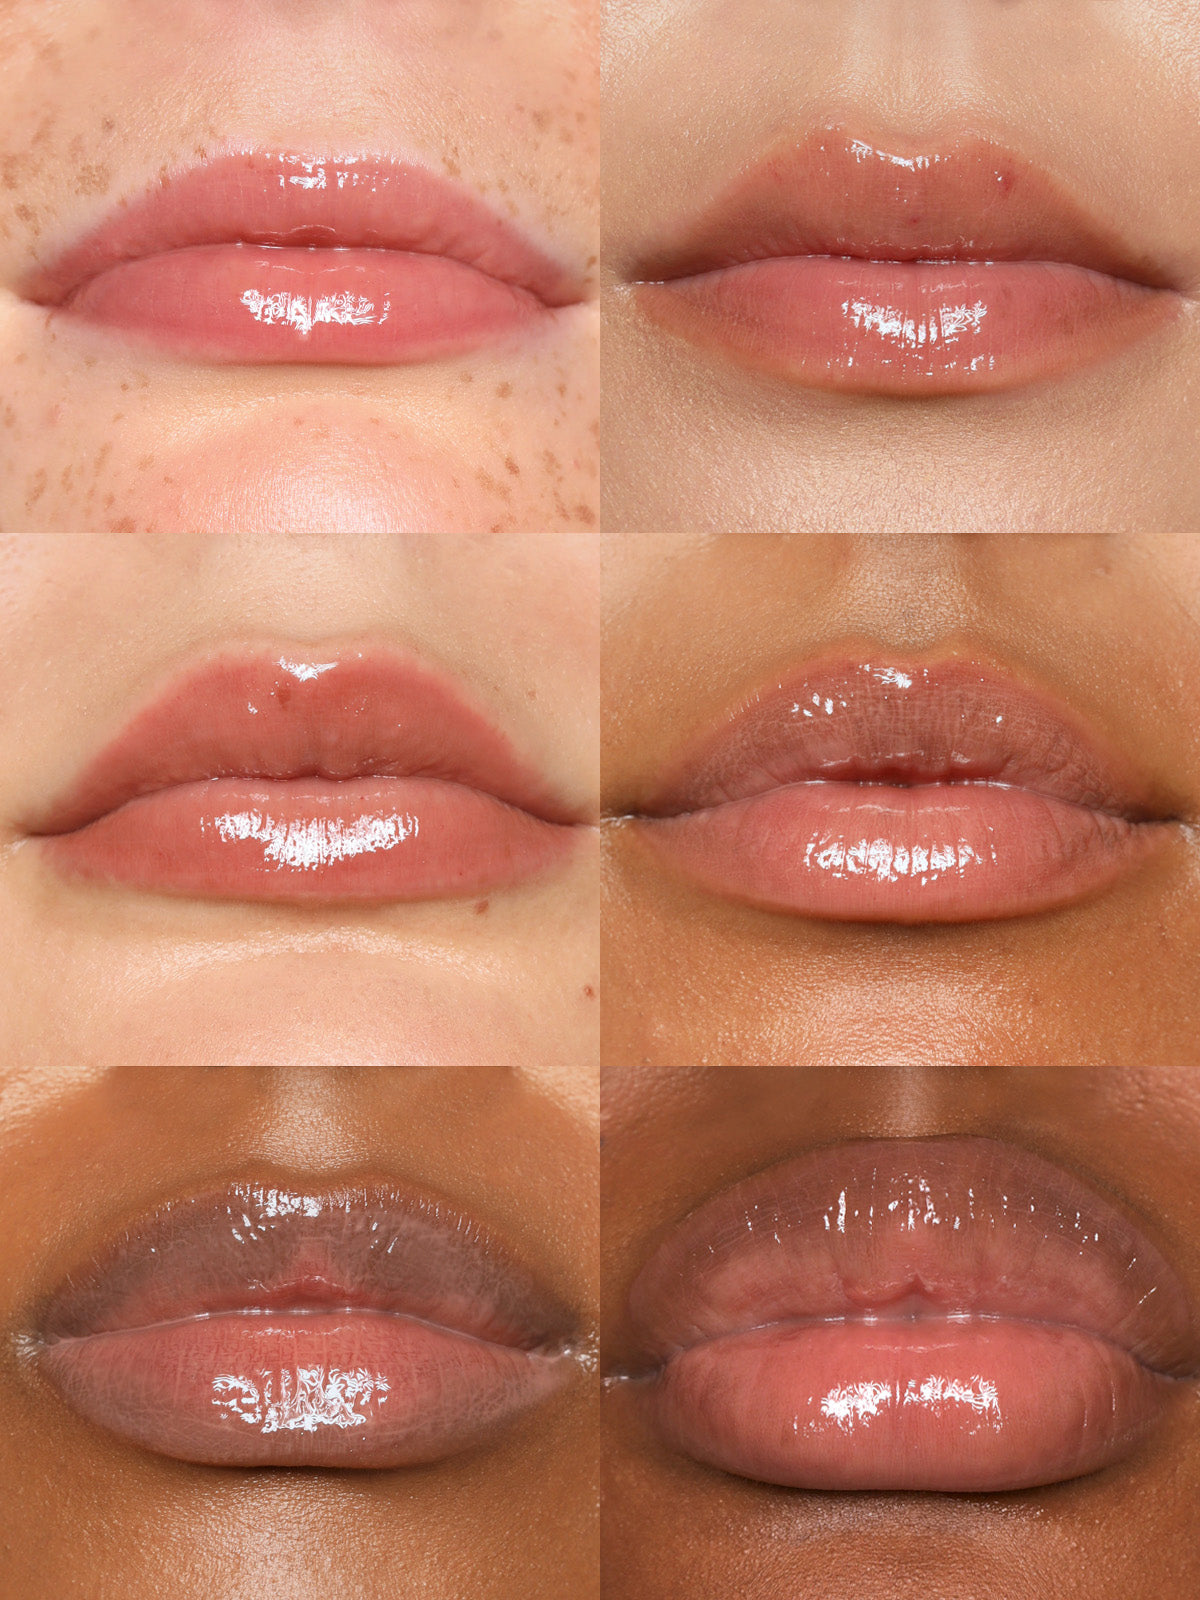 GRID OF REFY LIP GLOSS IN SHADE TAUPE ON DIFFERENT SKIN TONES